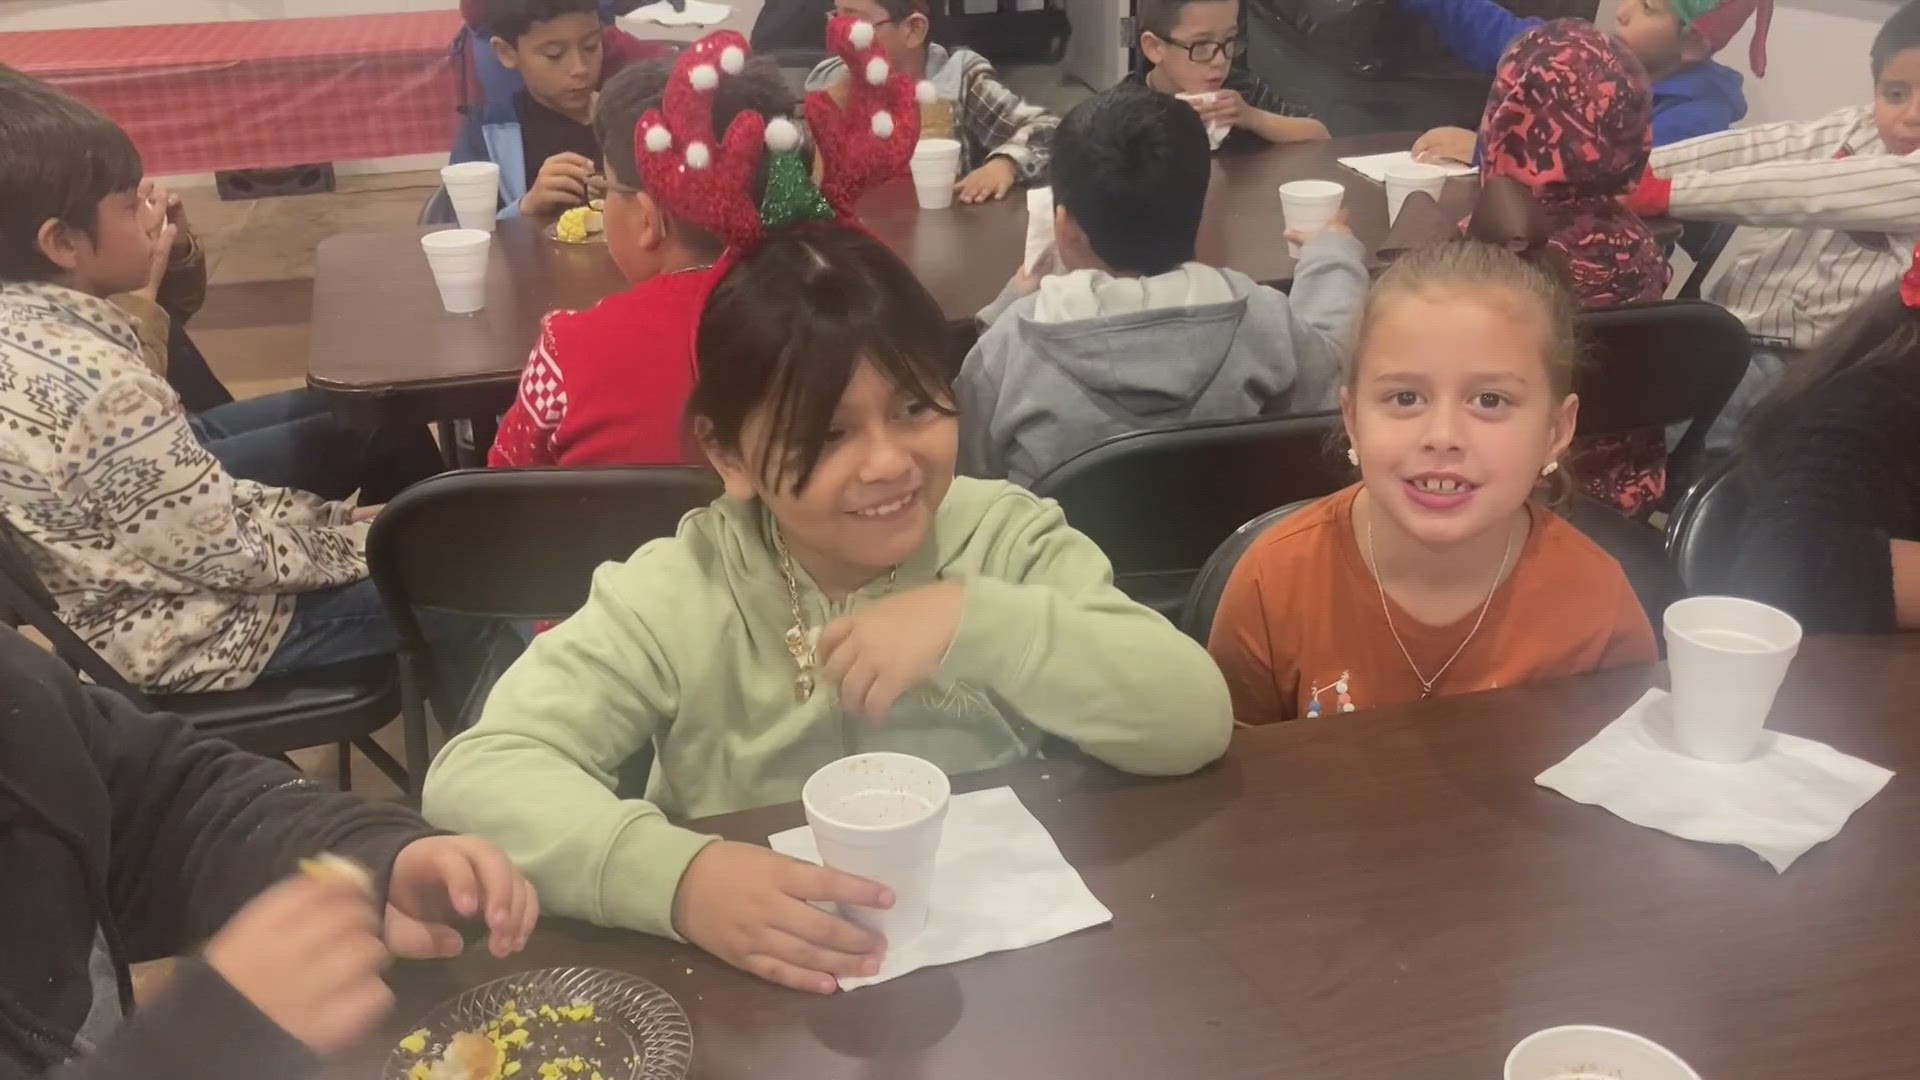 All 150 second graders at Alamo Elementary were treated with hot chocolate, treats and a Christmas movie, just in time for the holiday season.